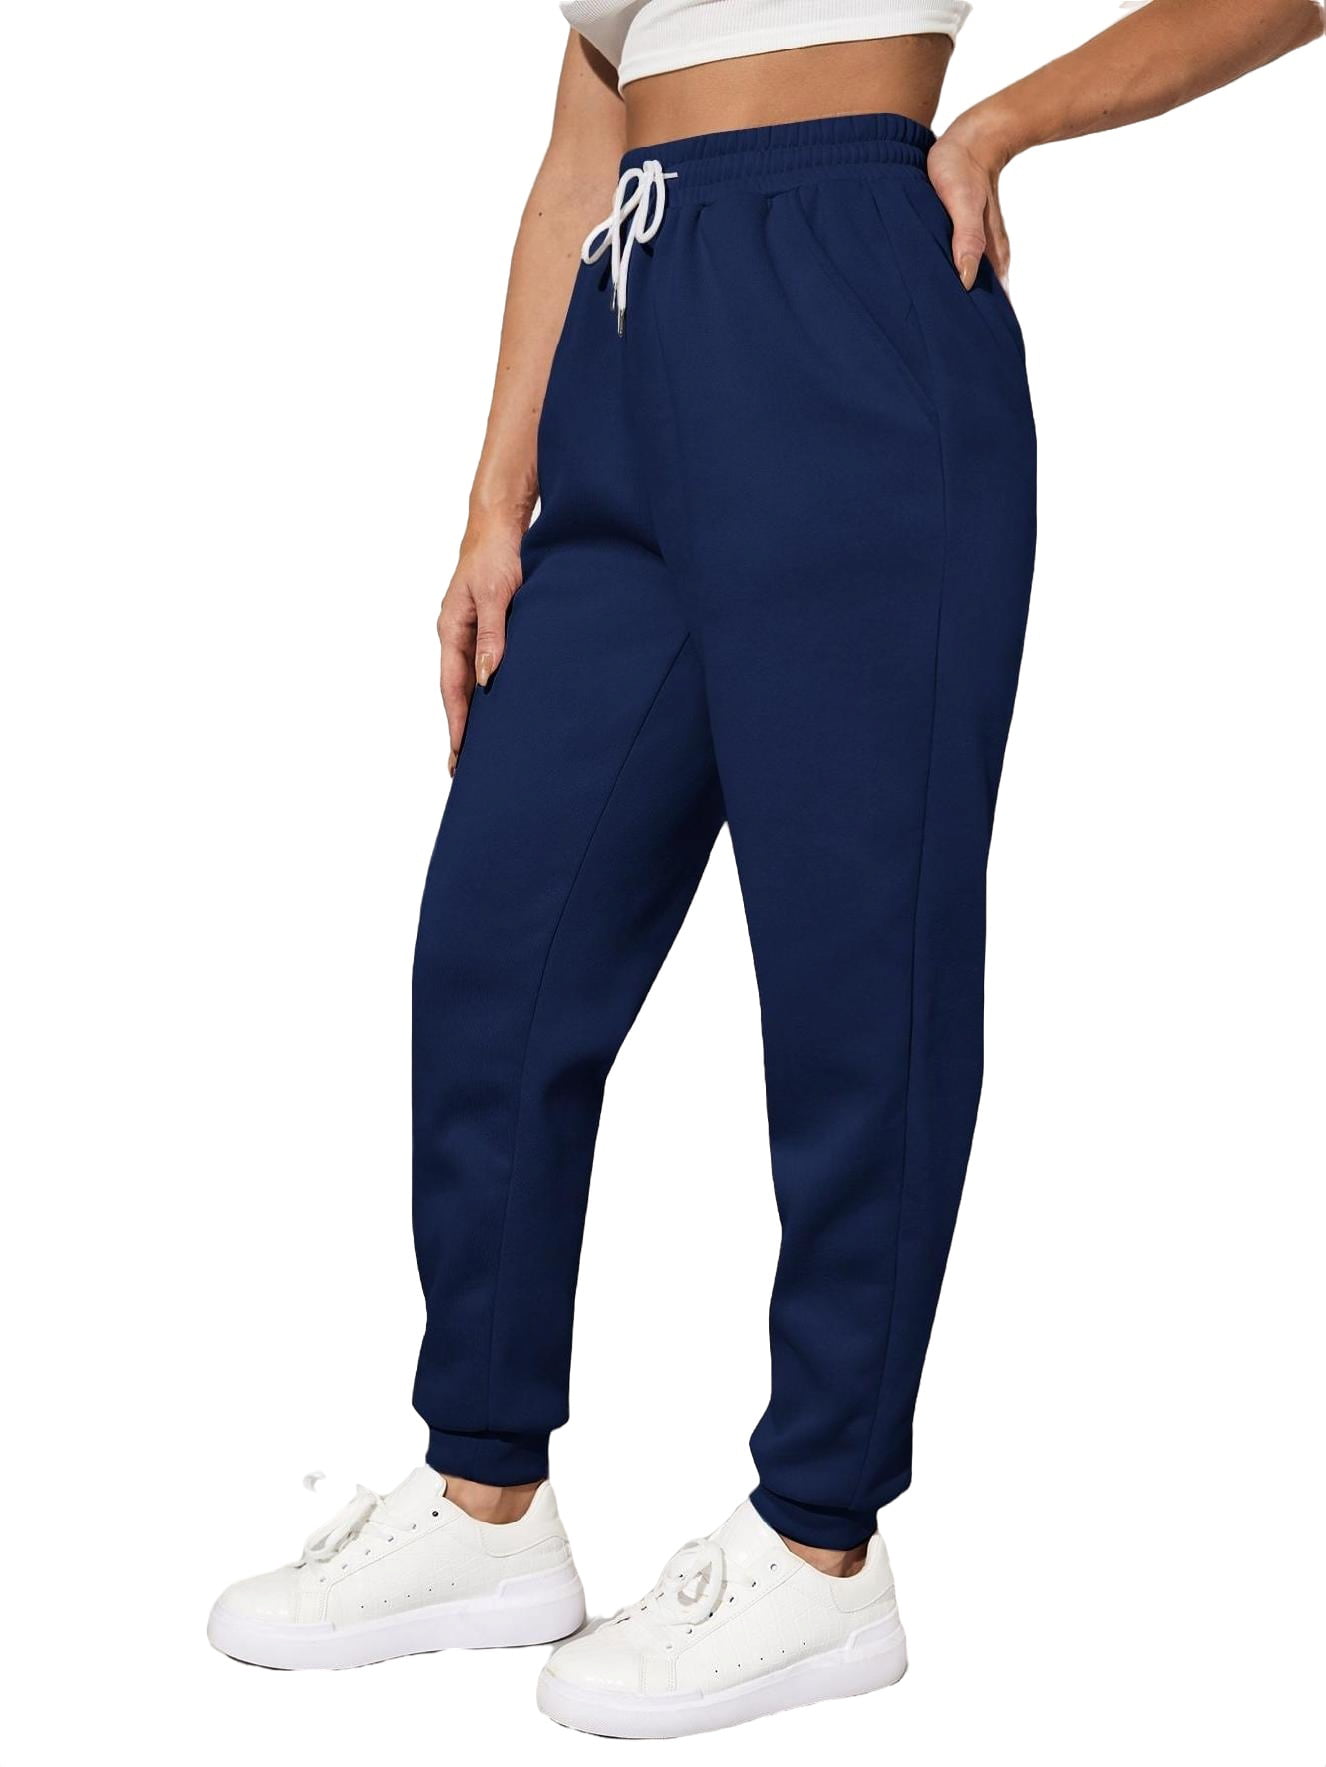 Womens Casual Pants Drawstring Waist Solid Joggers Navy Blue S